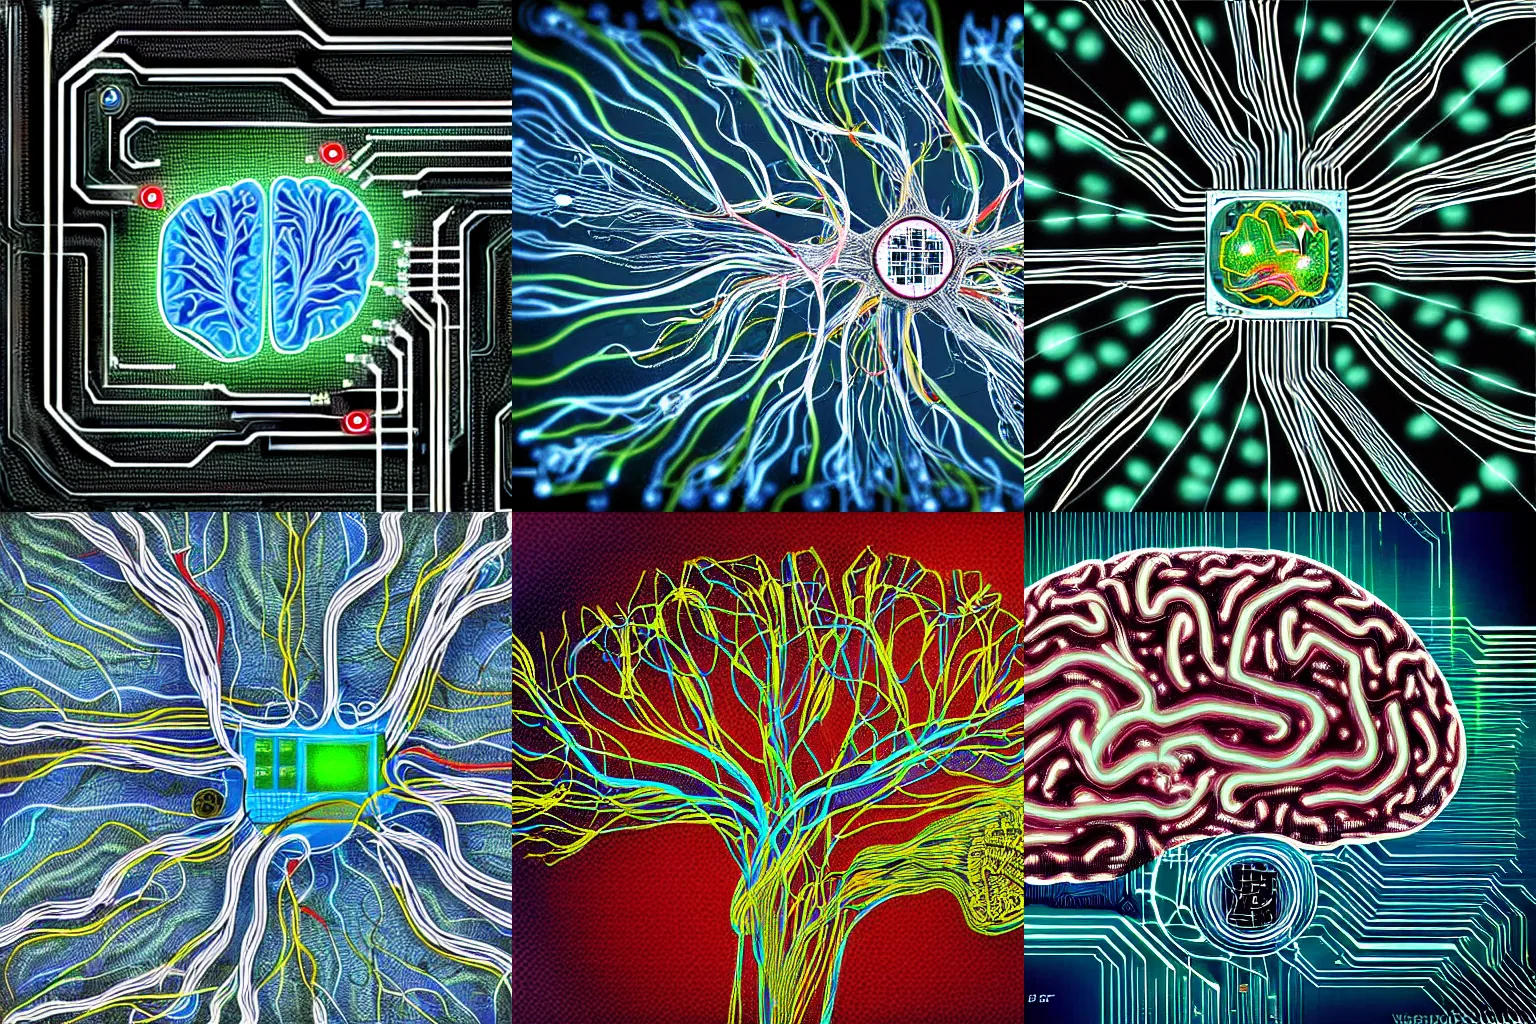 Prompt: integrated circuit, human brain, neurons and synapses, printed circuit board, wire bond, electrical signals, detailed, realistic, in style of digital painting